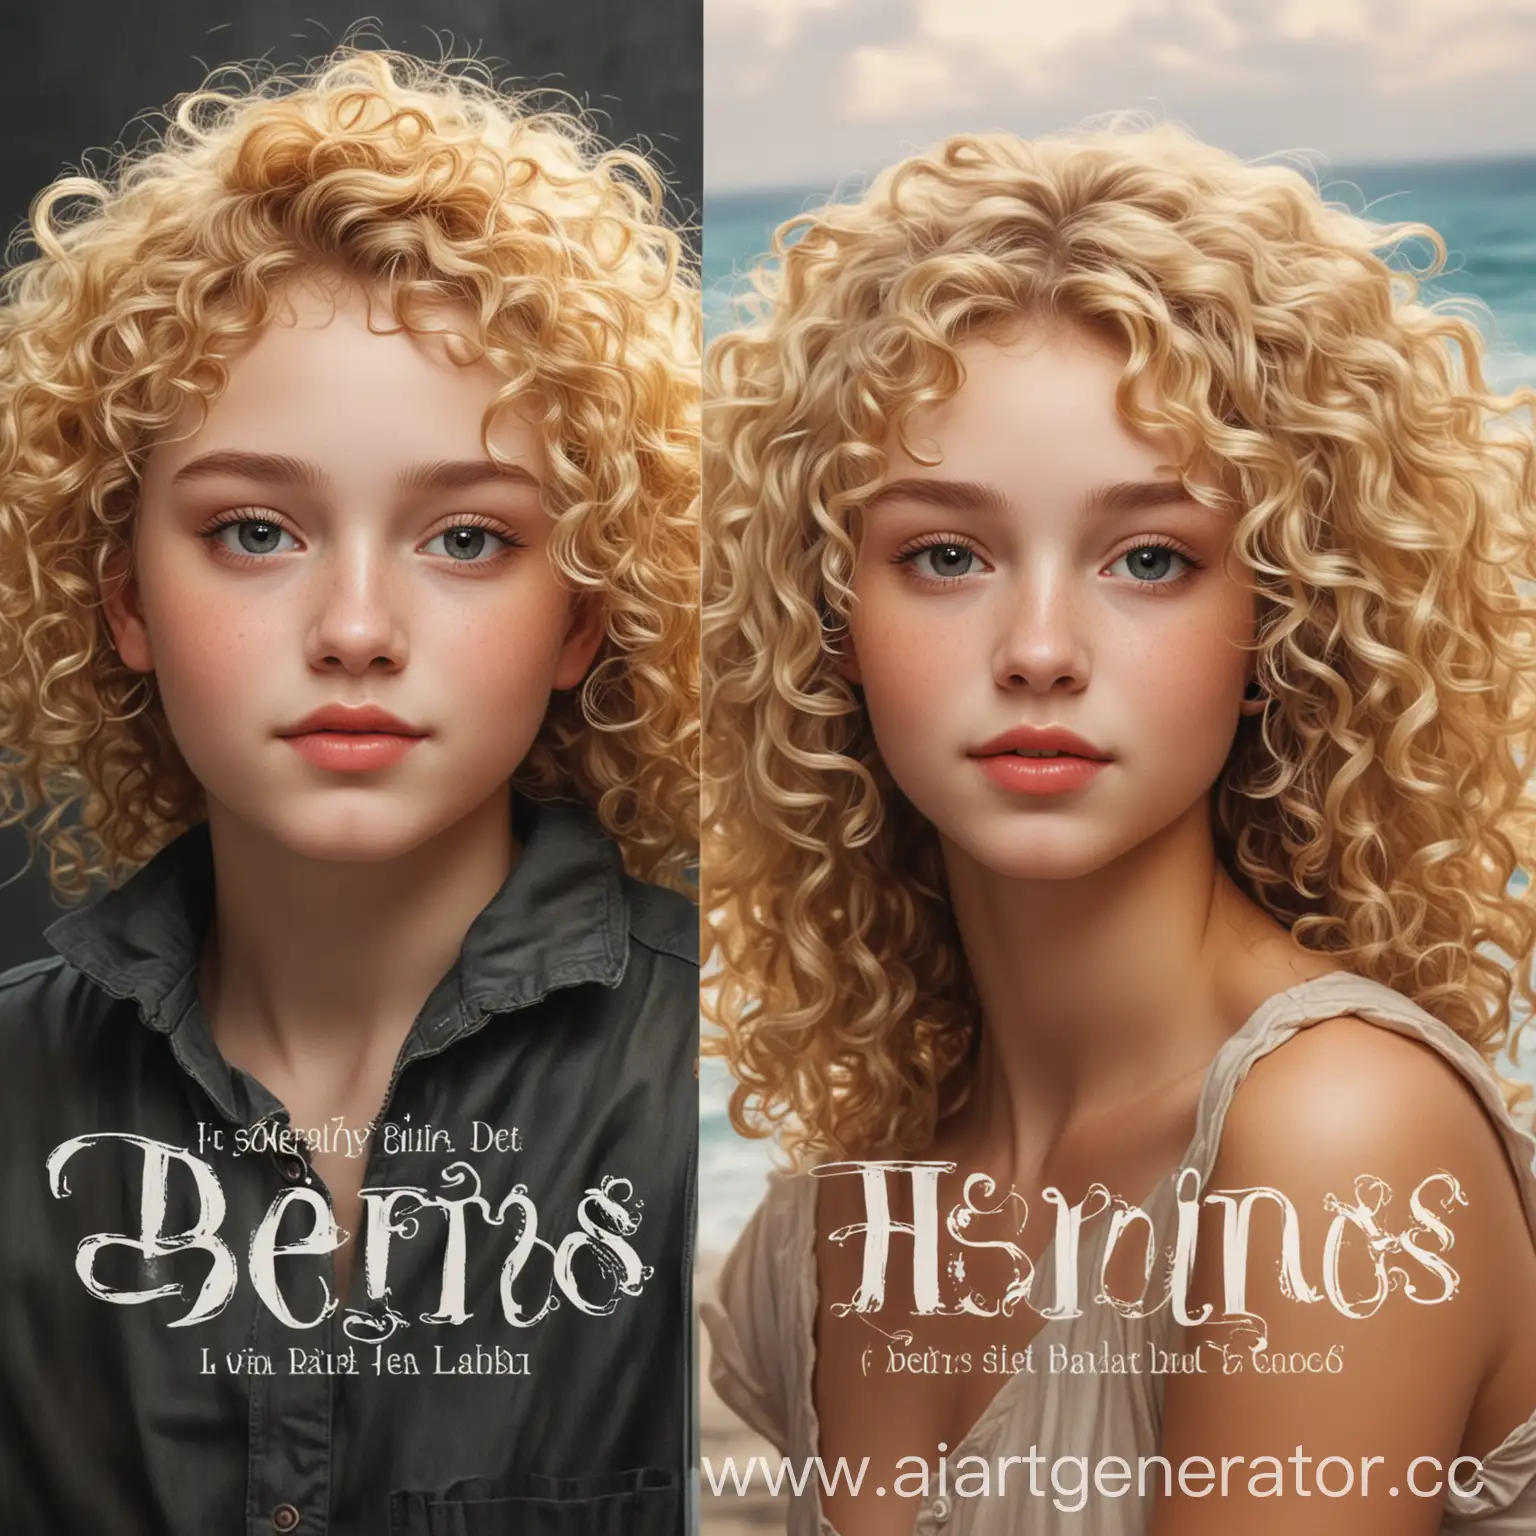 Book-Covers-Featuring-CurlyHaired-Youth-and-Blonde-Beauty